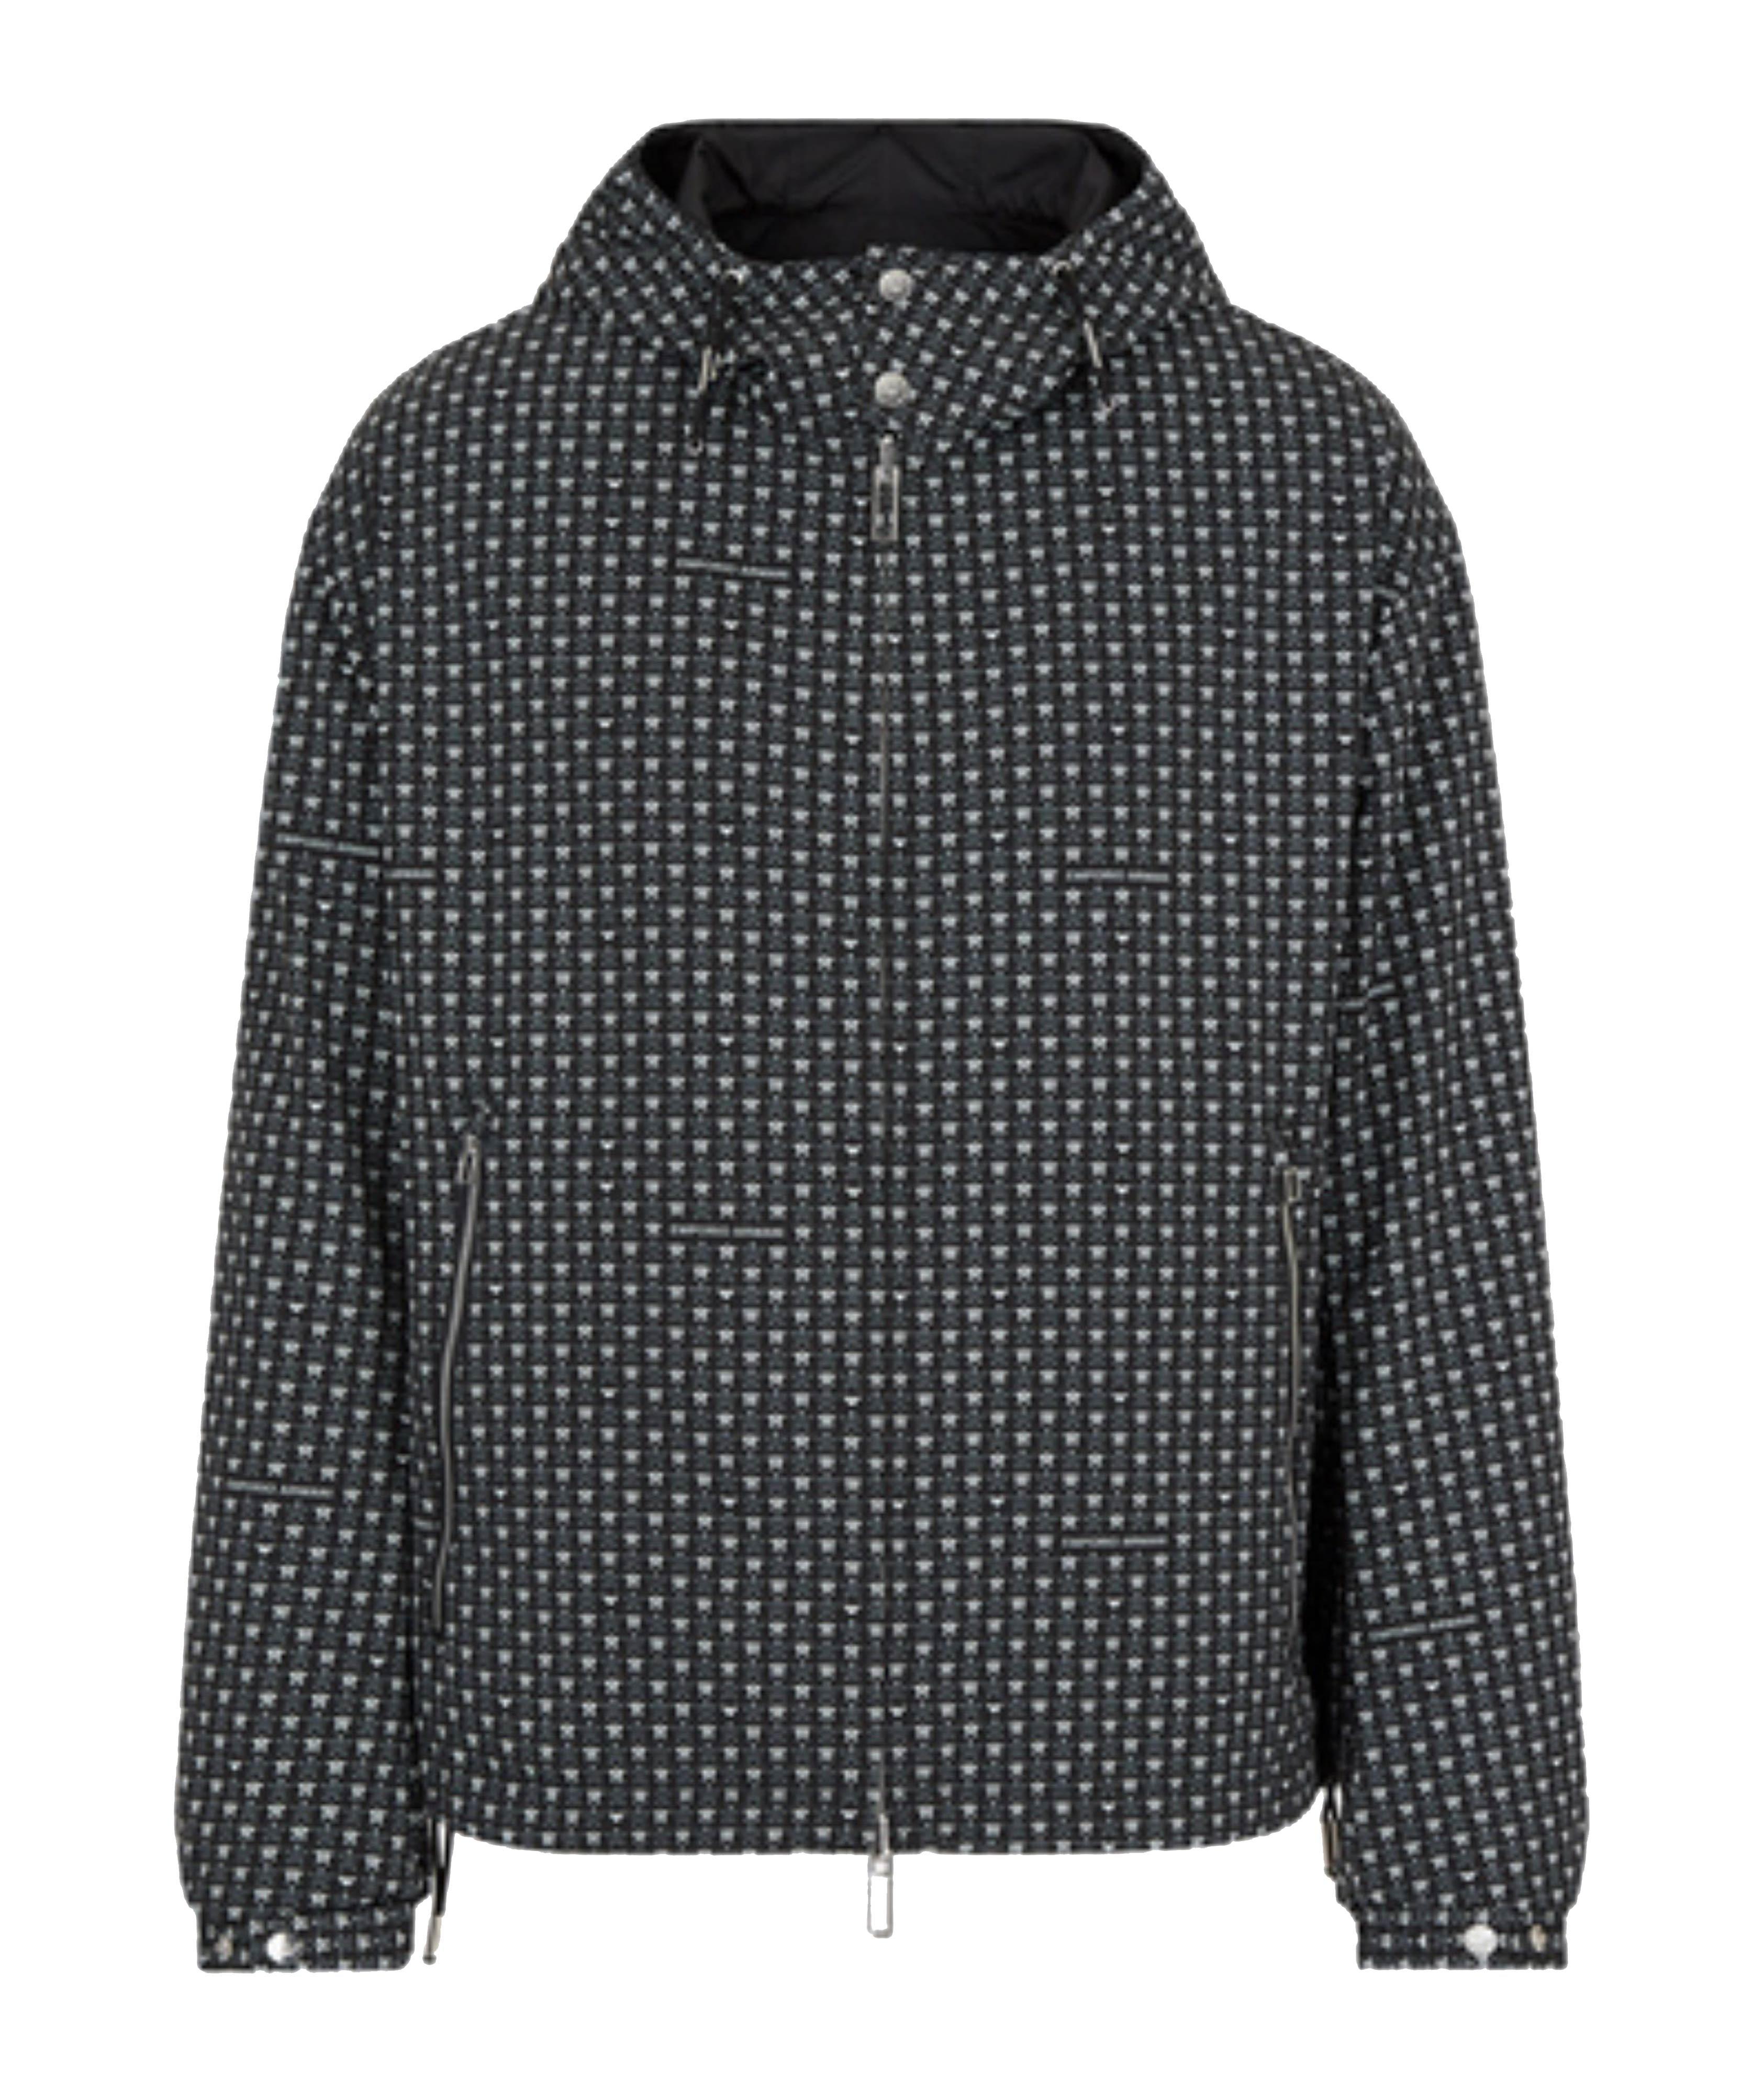 Reversible Hooded Blouson With Star Print image 0